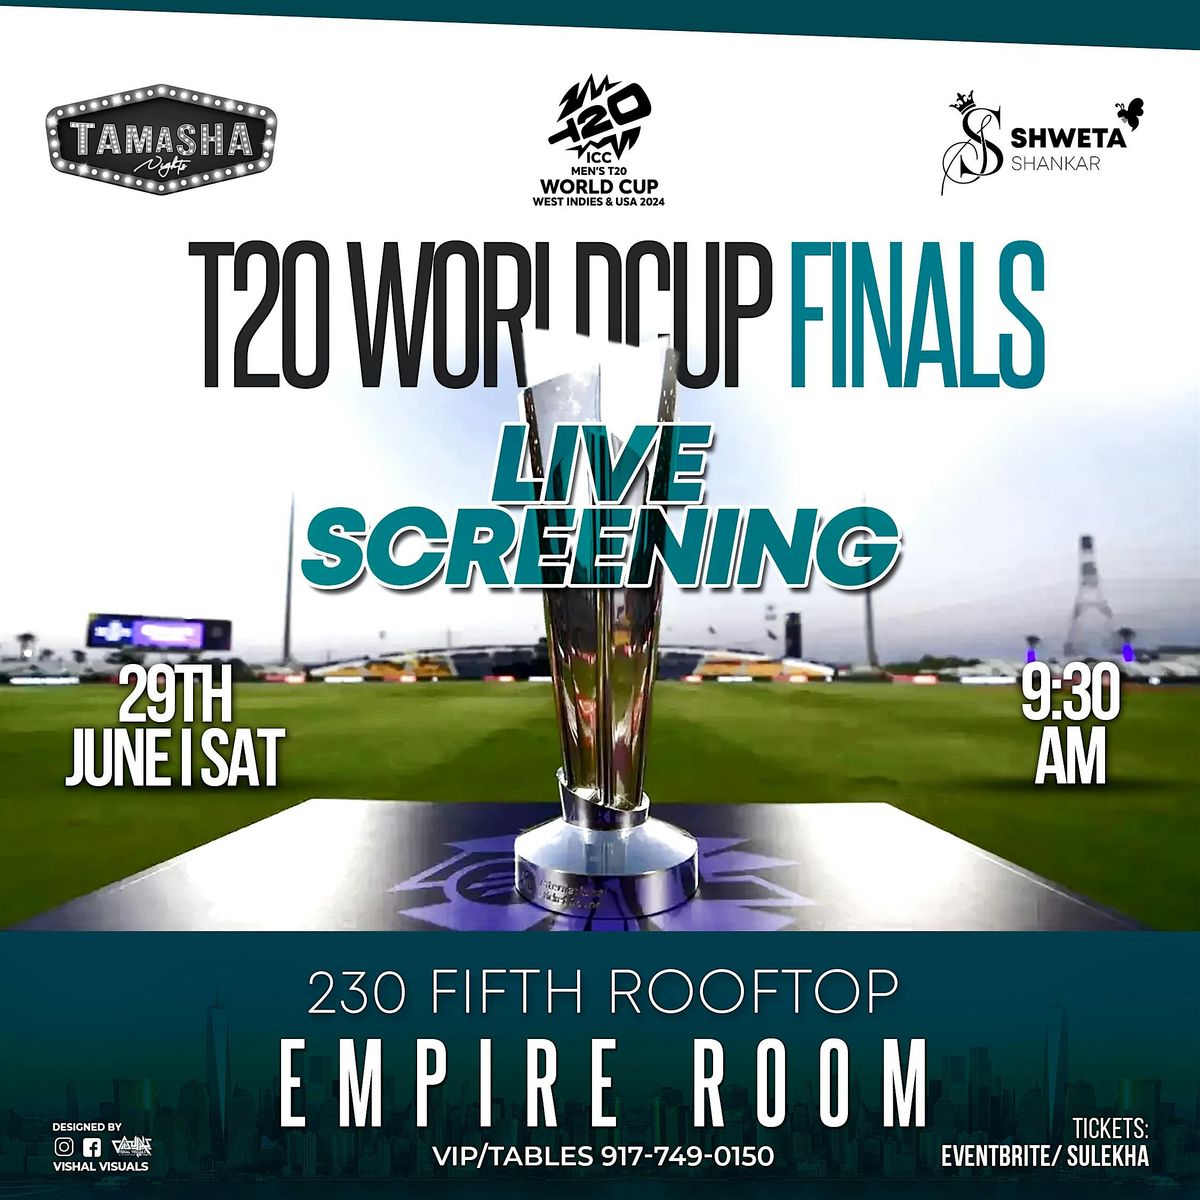 NYC BOLLYWOOD CRICKET WATCH PARTY | JUN 29 | T20 WORLD CUP FINALS